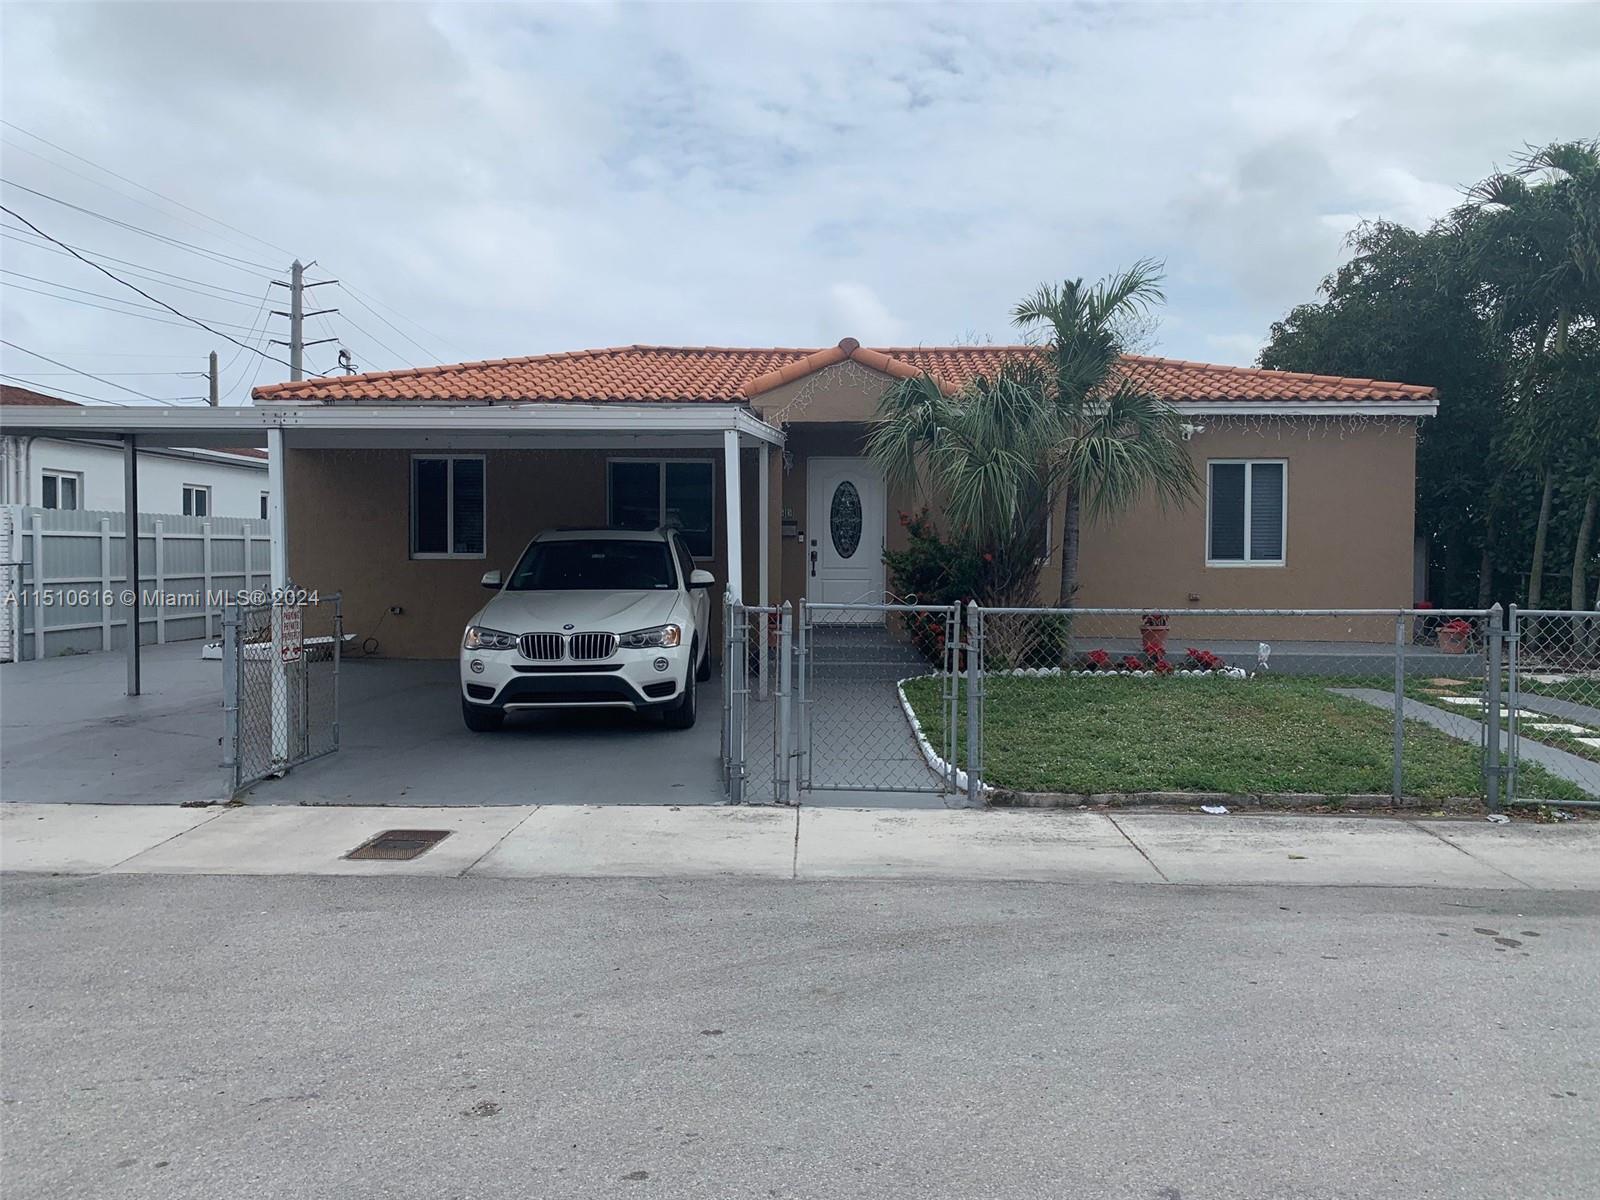 Photo of 455 NW 45th Ave in Miami, FL